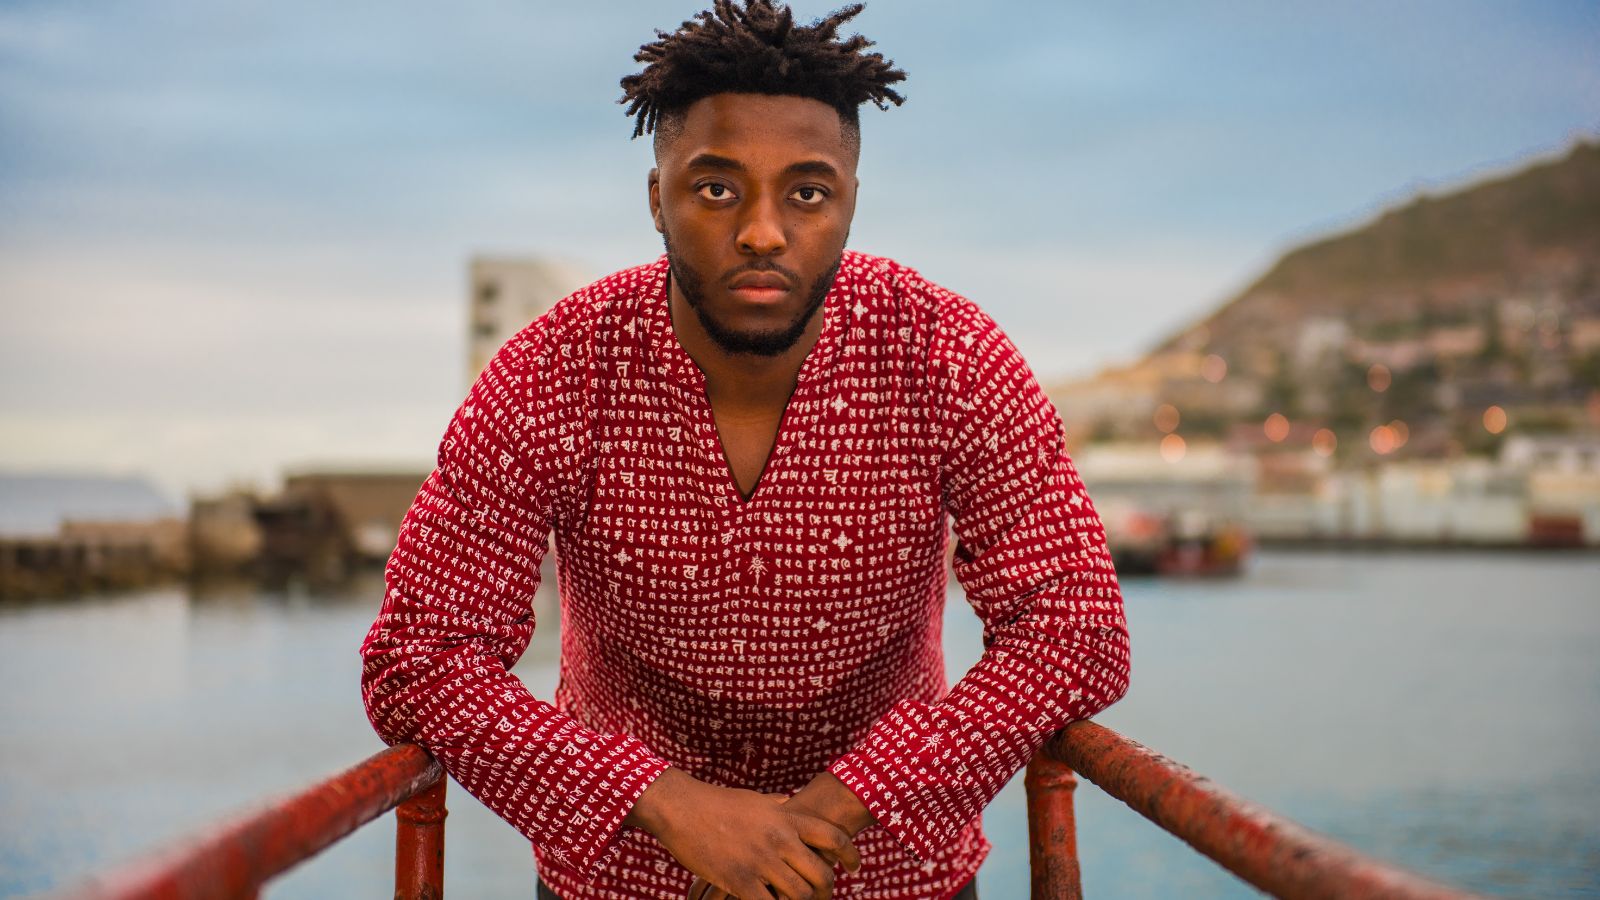 CAPE TOWN, SOUTH AFRICA - CIRCA 2021: Portrait of young African man in a red shirt at sunset